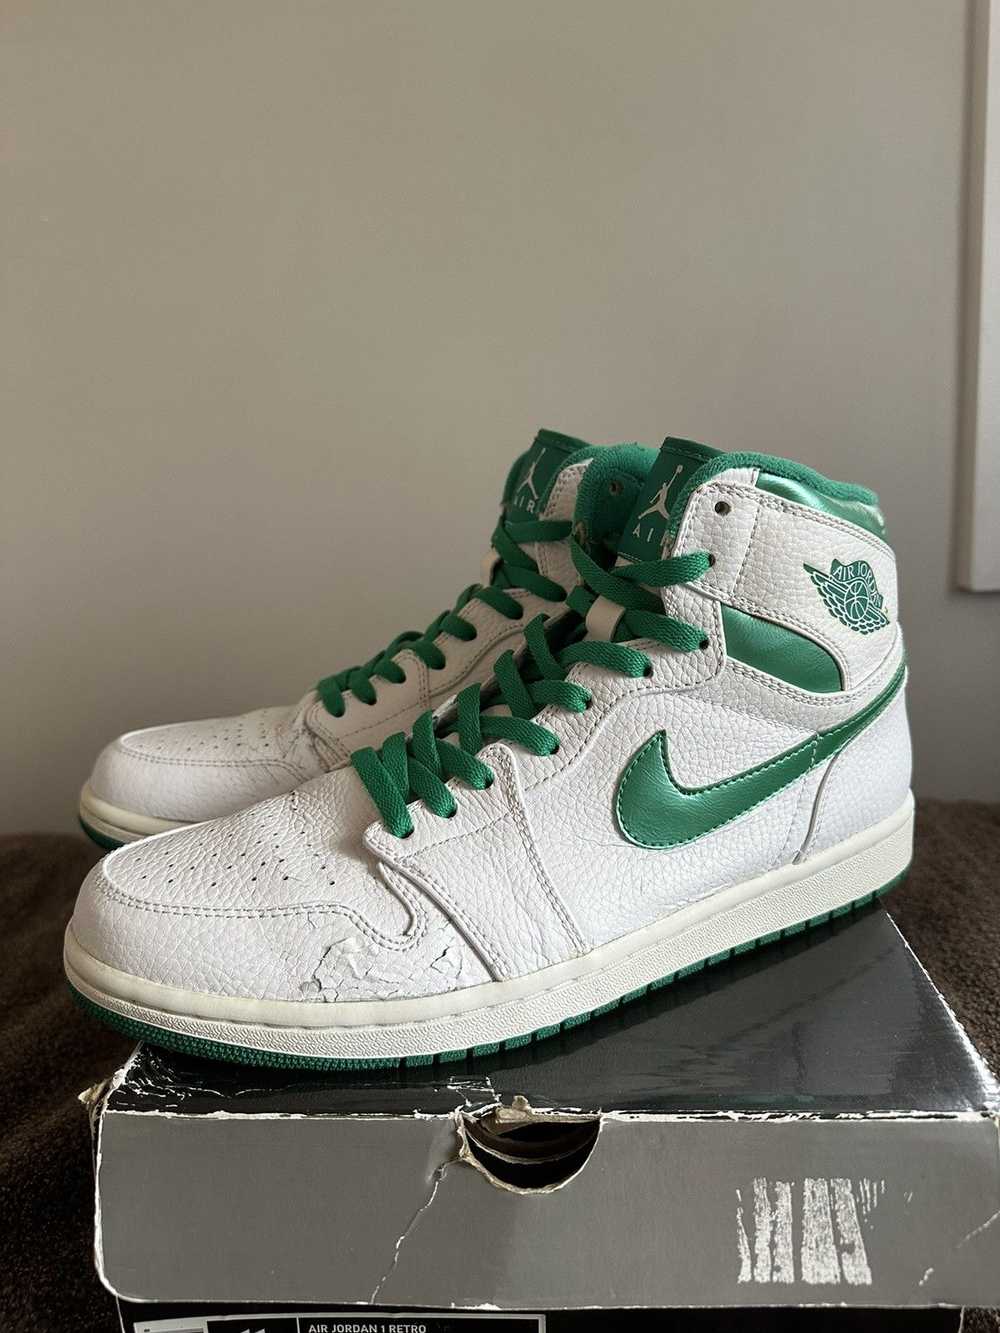 Jordan Brand × Vintage “Do the Right Thing” Green… - image 3